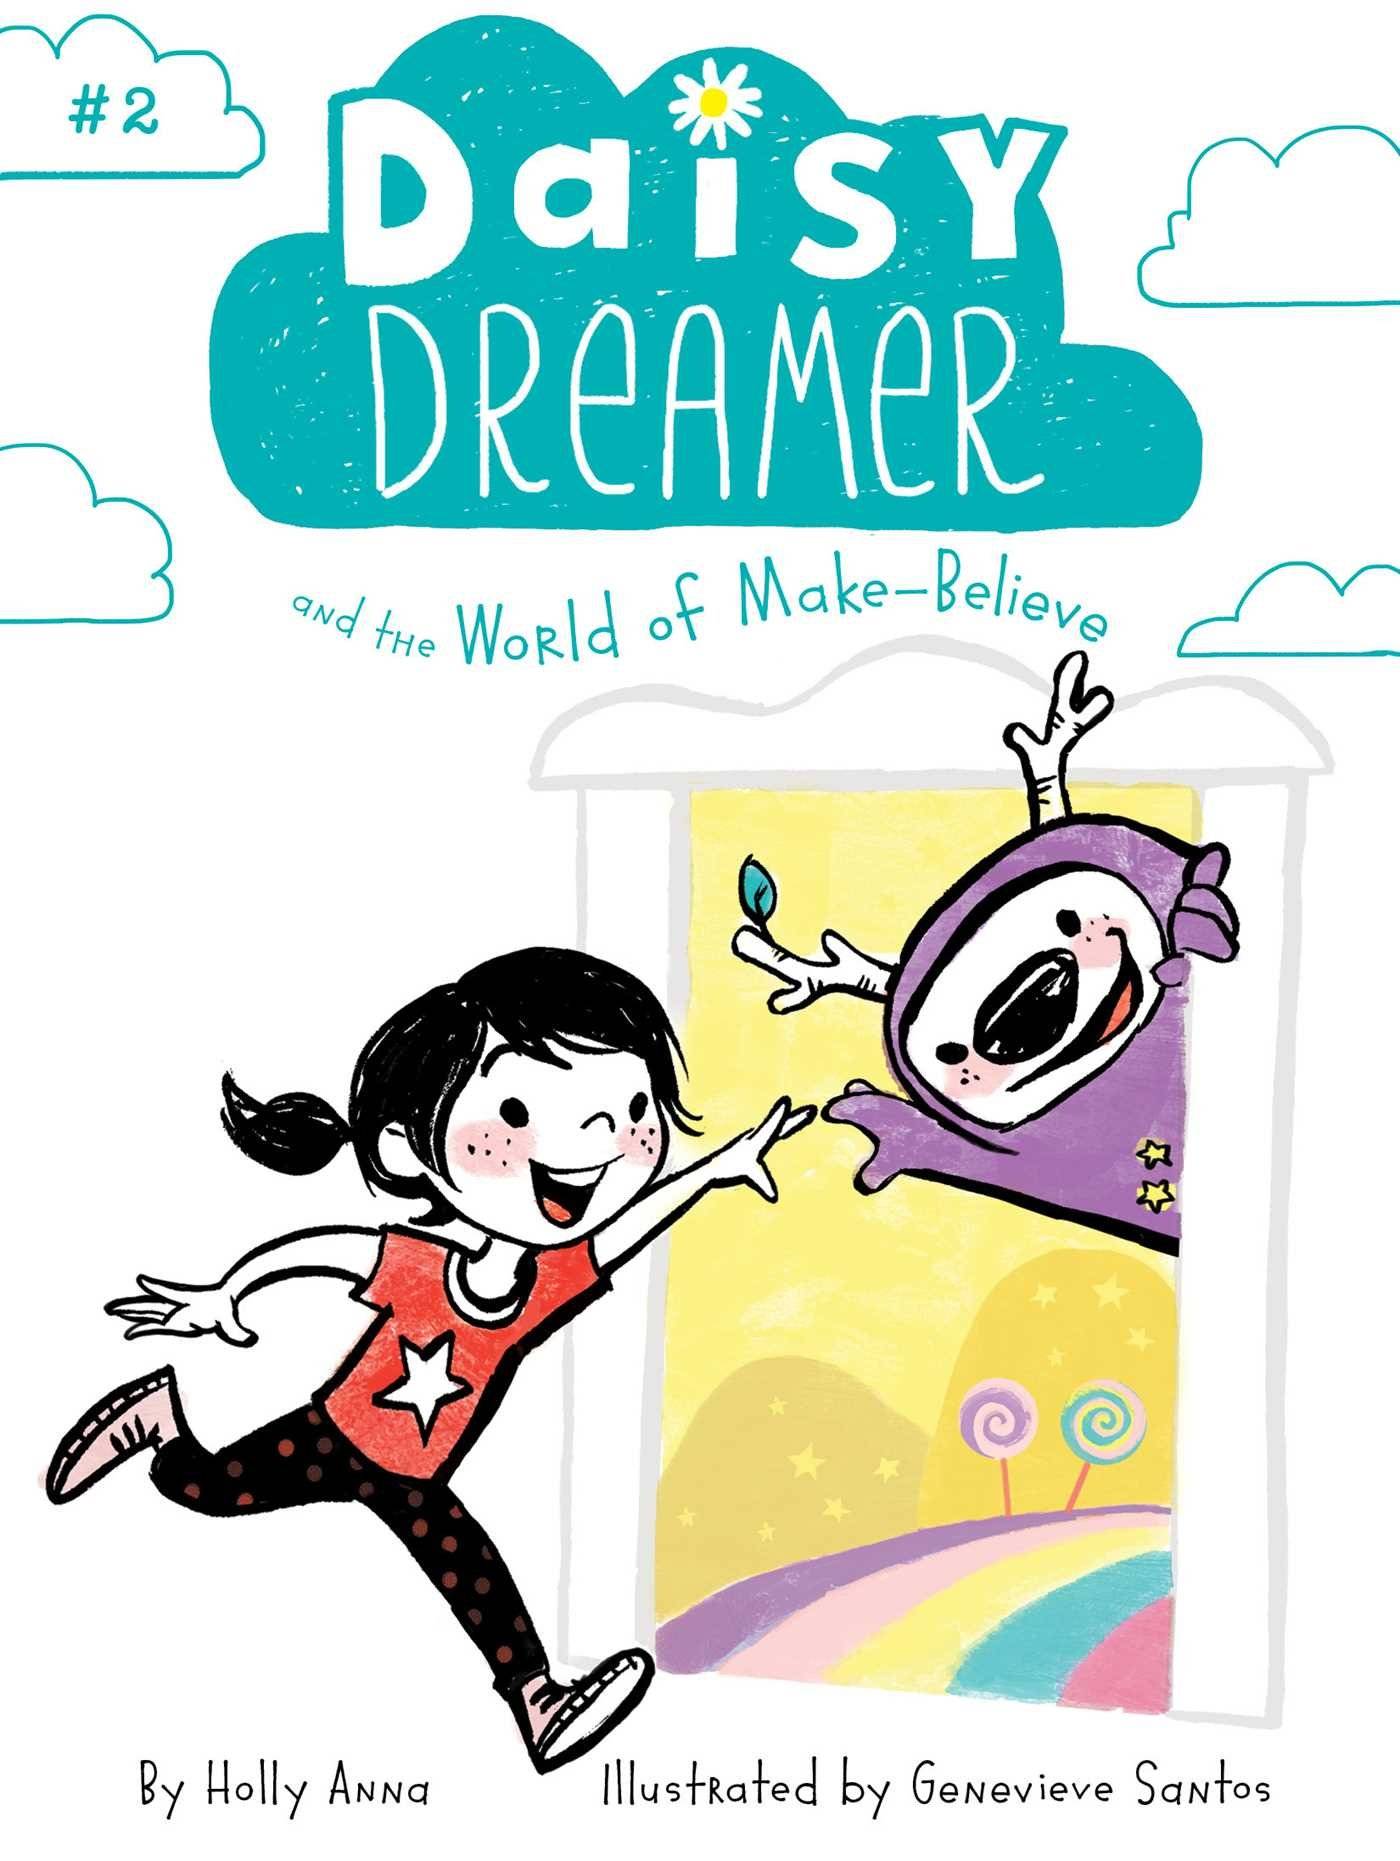 IMG : Daisy dreamer and the world of make believe #2